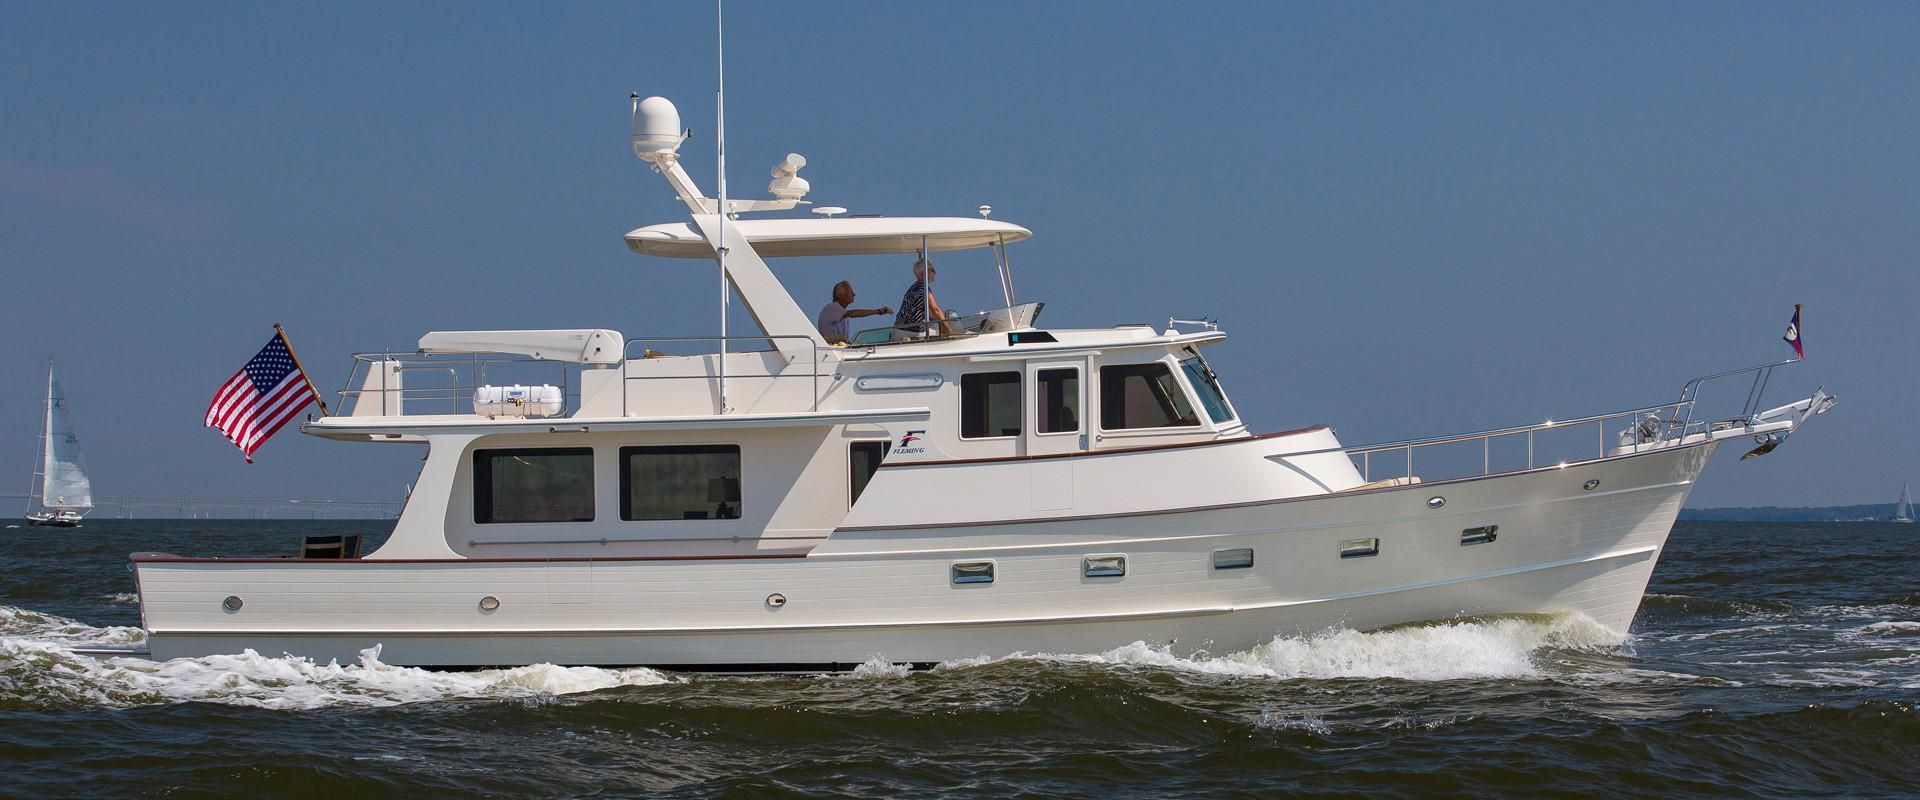 fleming yachts for sale used